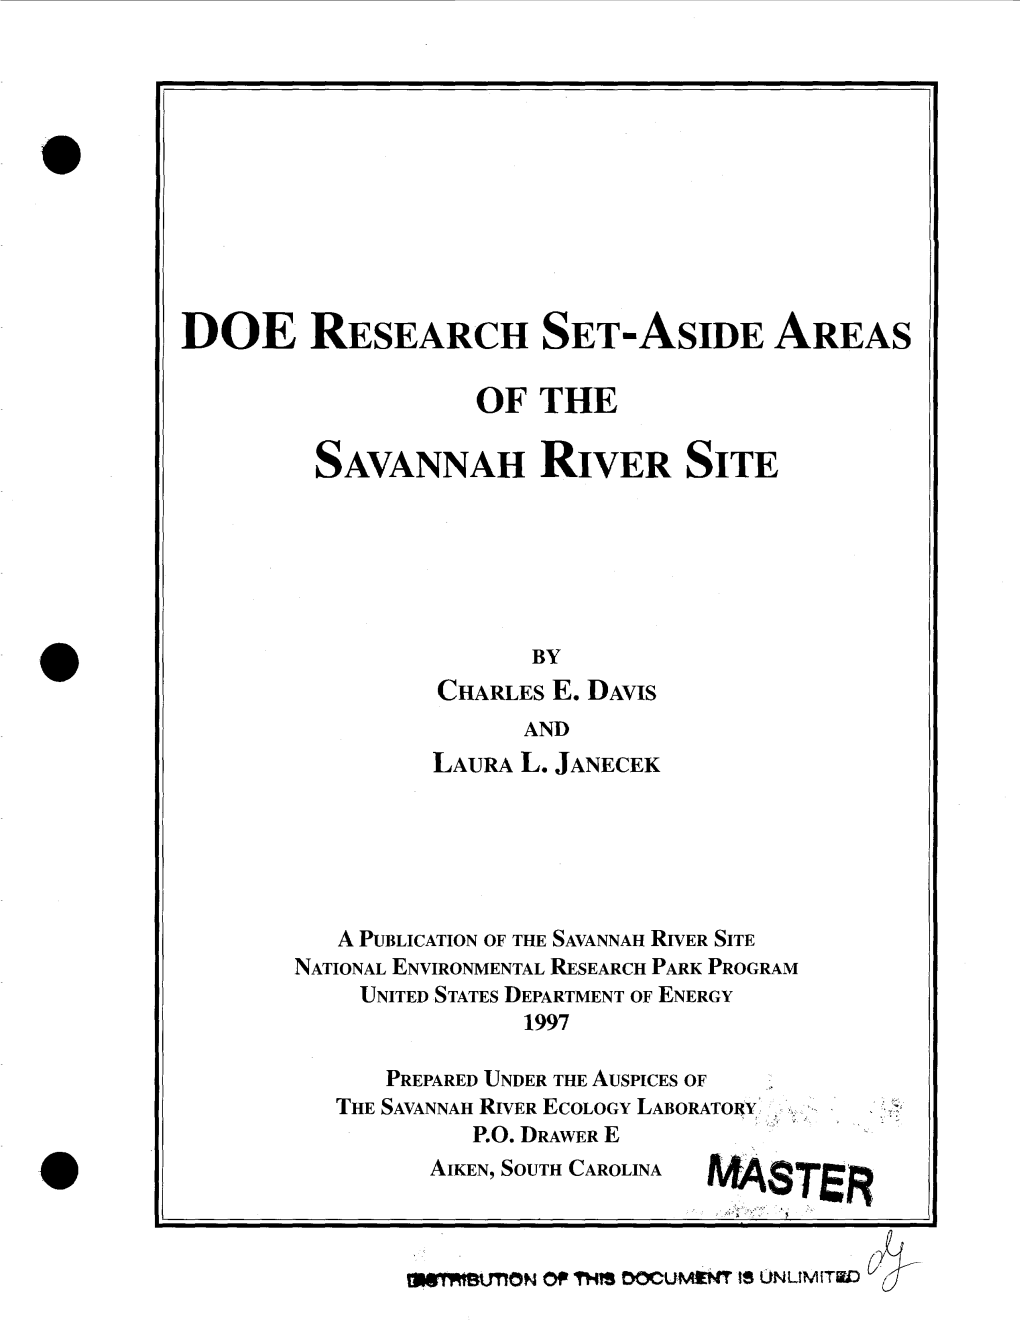 Doe Research Set-Aside Areas of the Savannah River Site